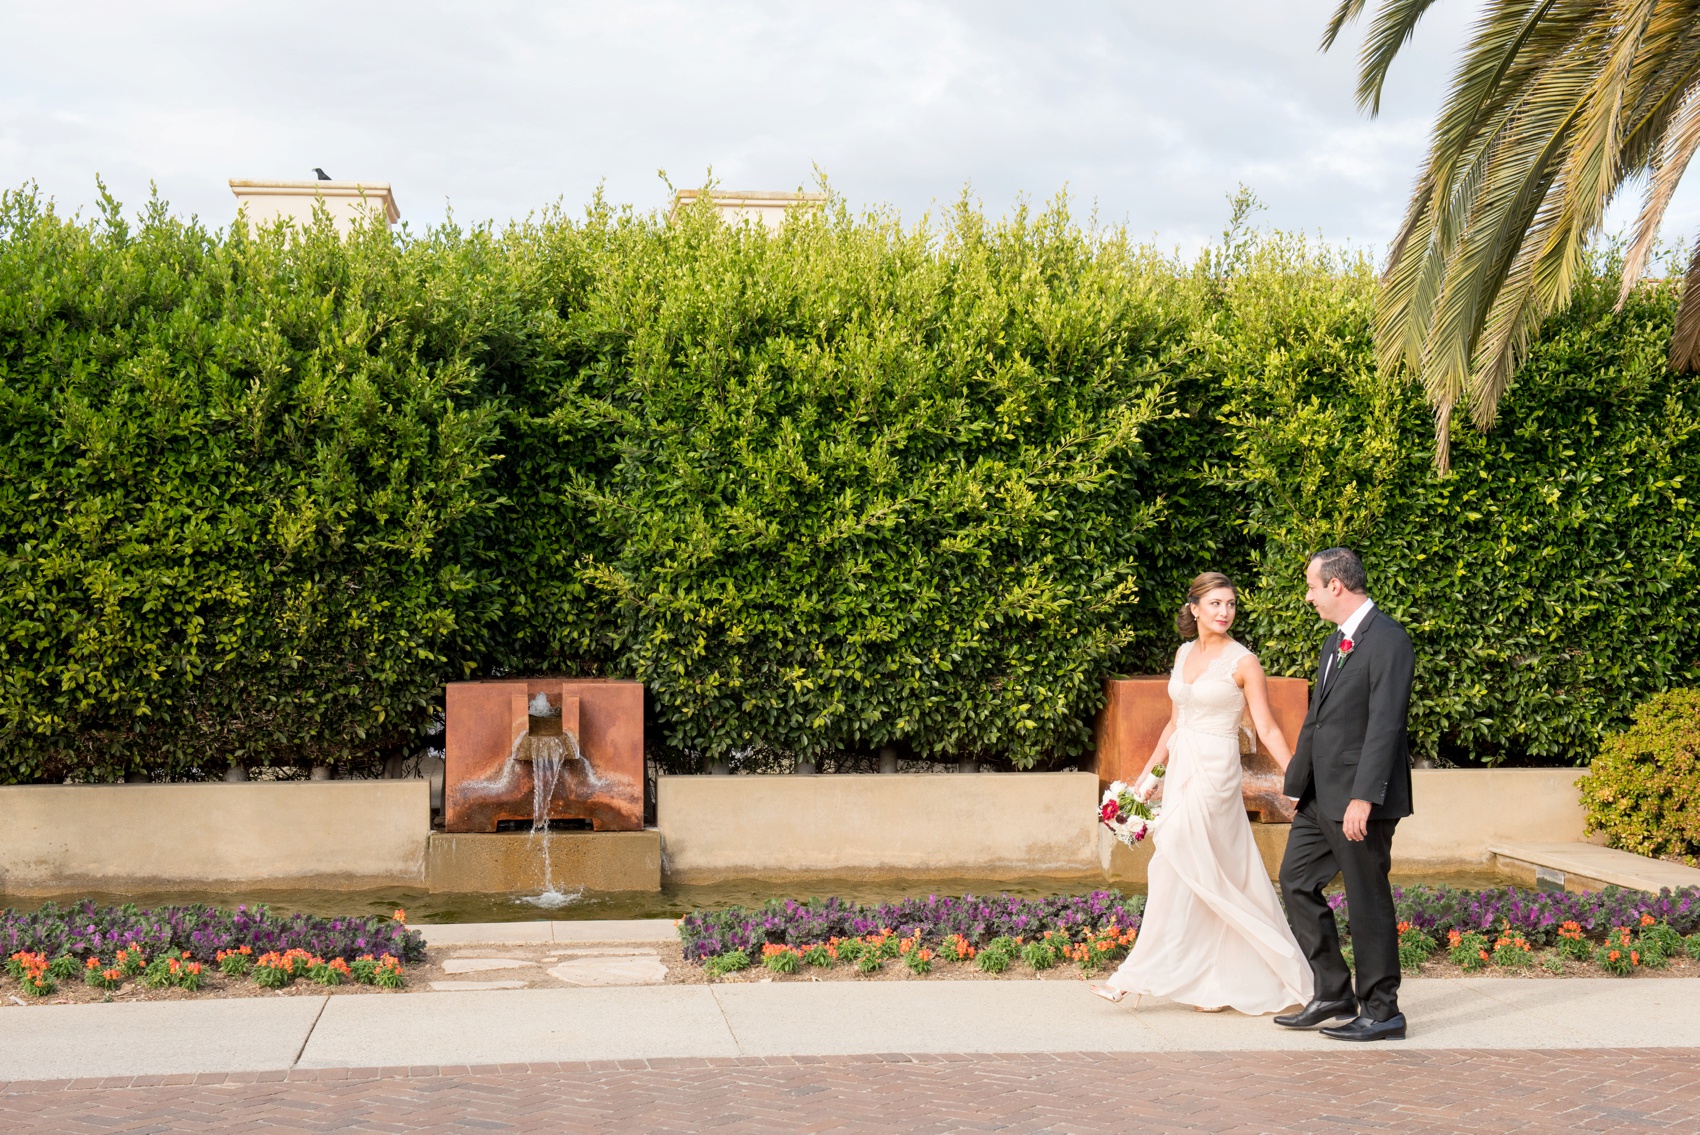 Estancia La Jolla wedding photography by Mikkel Paige Photography. Tropical wedding, California coast. Bride and groom photos. Bridal gown of lace and pink chiffon by BCBG Max Azria.